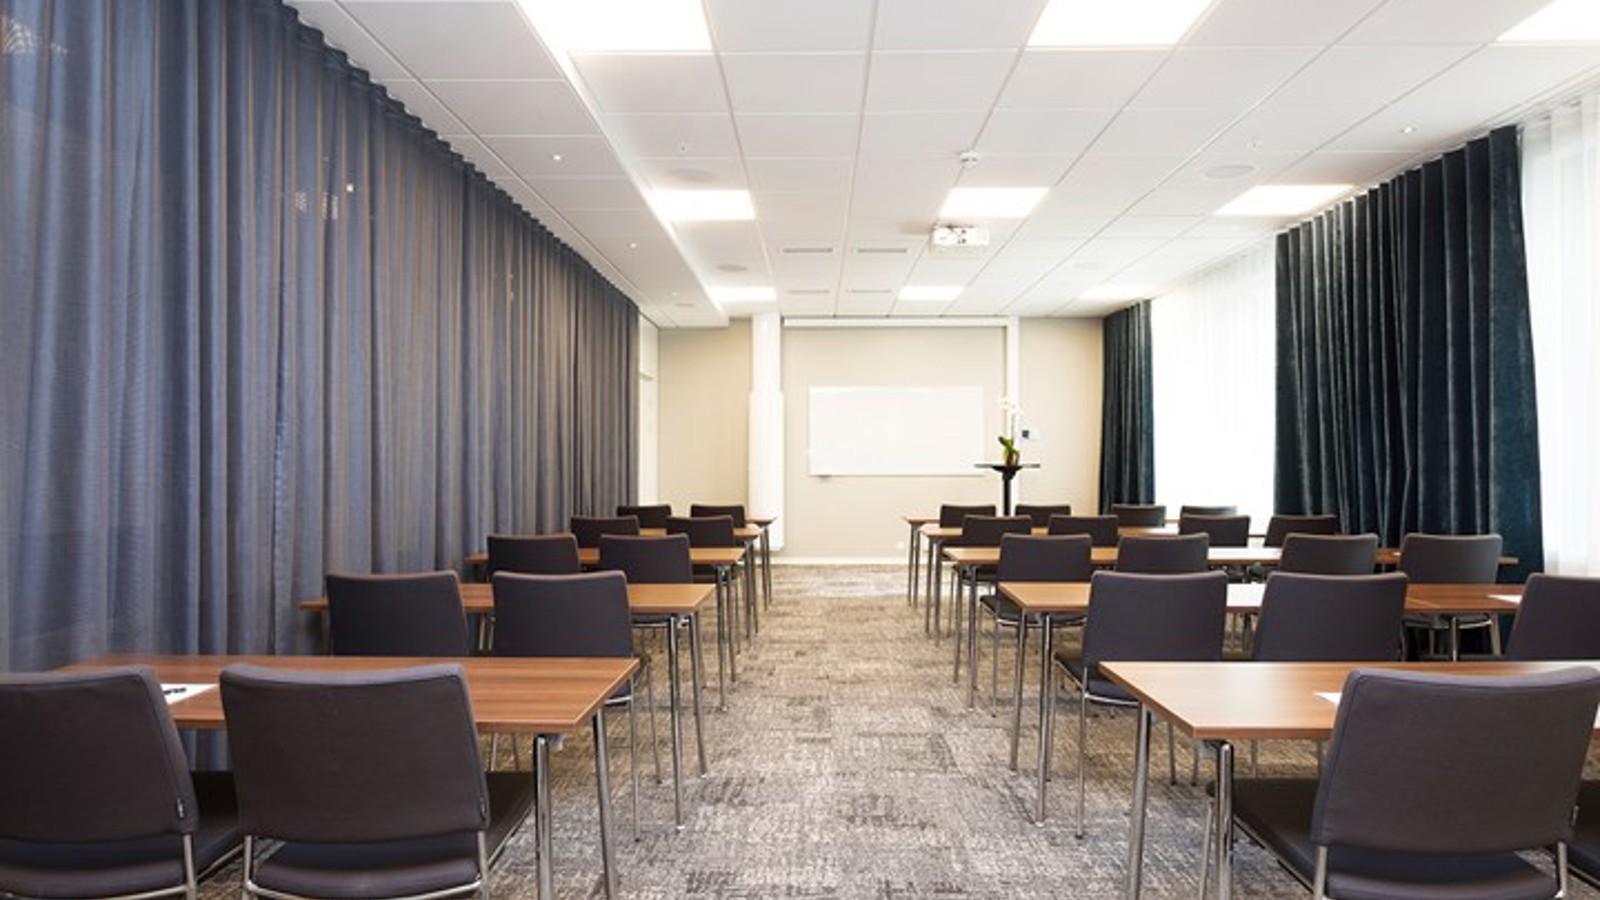 Conference room with school seating, gray floor and gray draperies